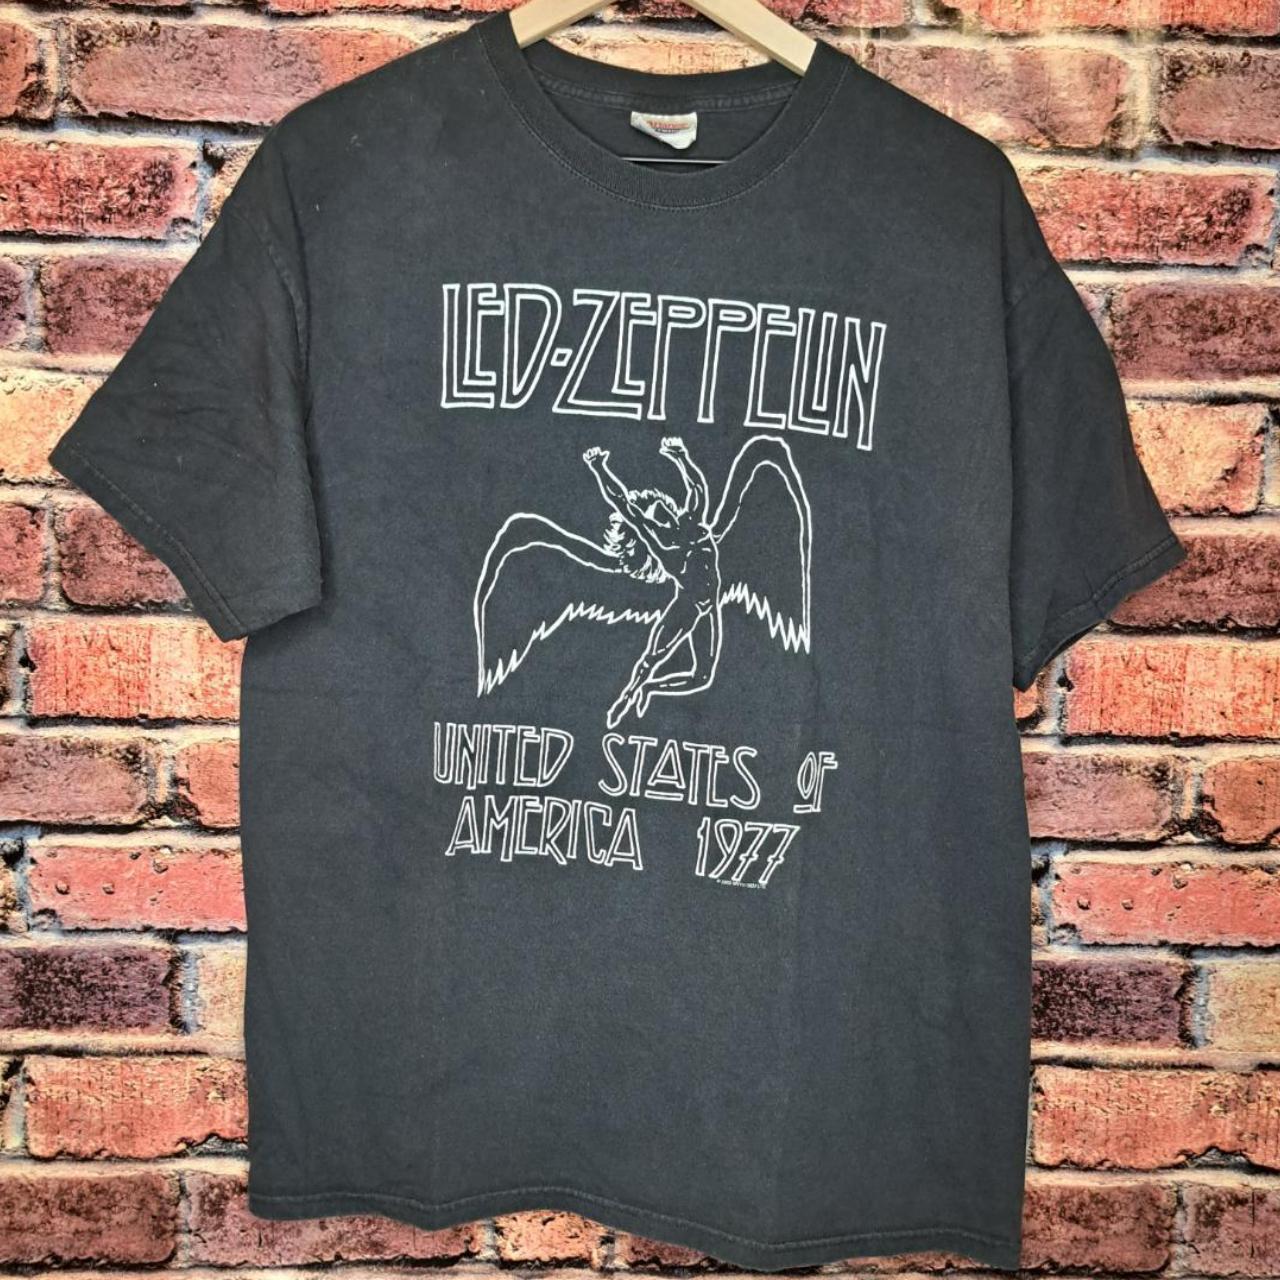 2003 Led Zeppelin Band t shirt Size L Reprint of the... - Depop